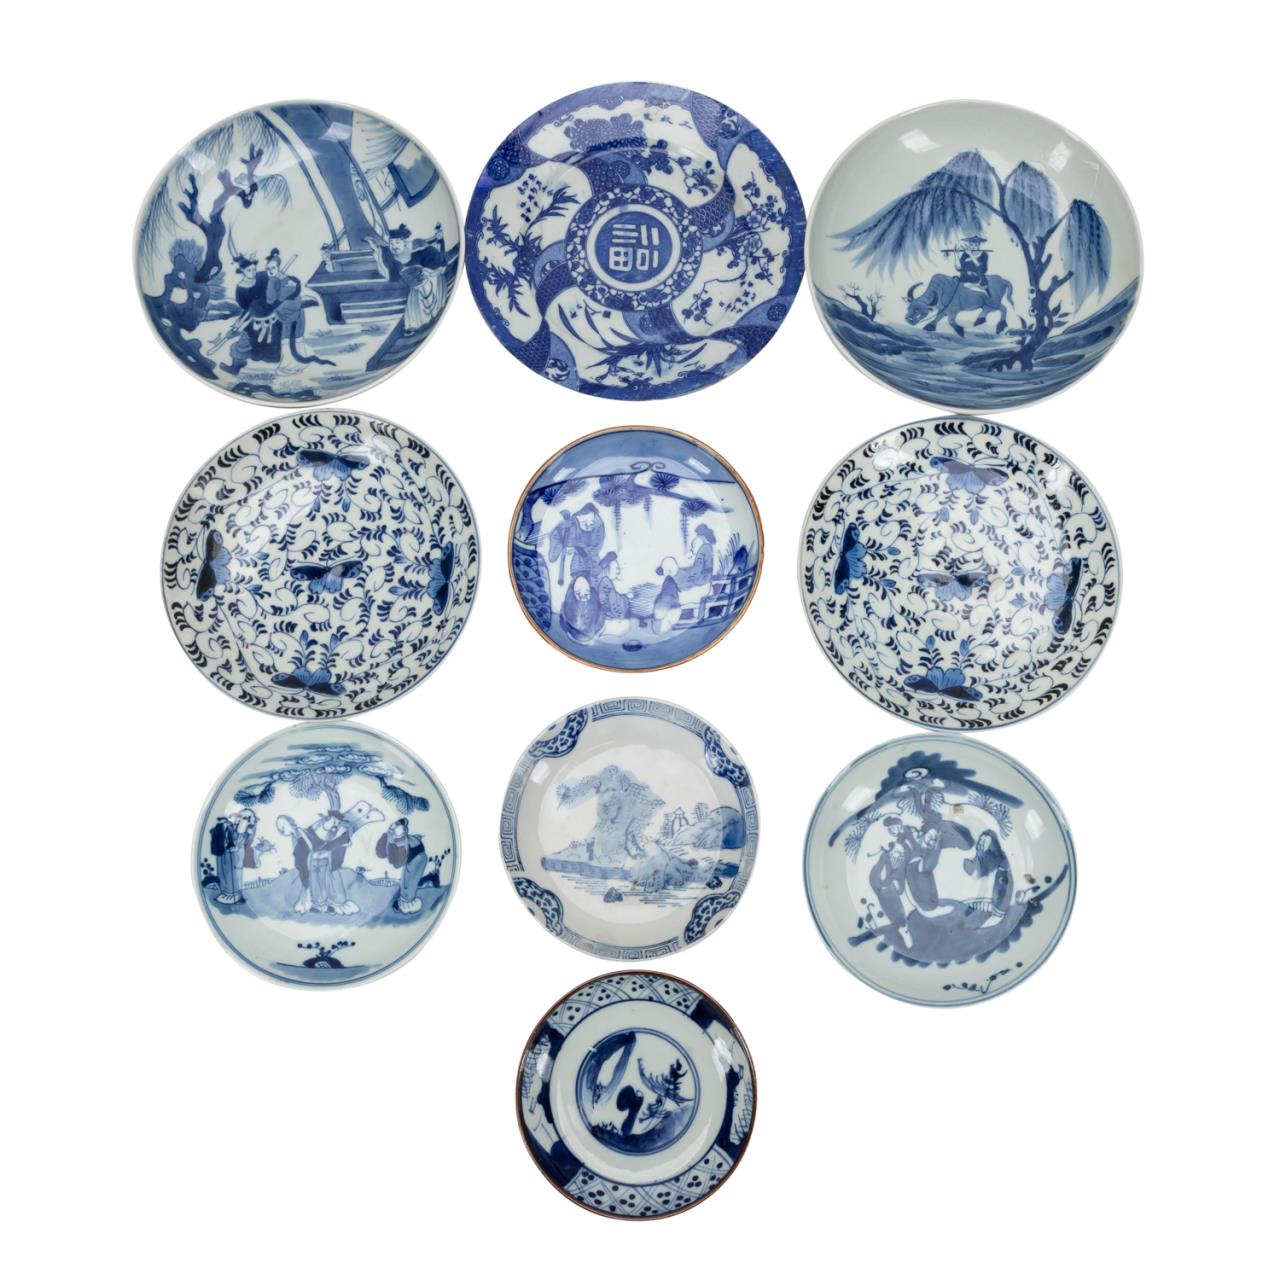 TEN MOSTLY CHINESE BLUE AND WHITE 29f74a